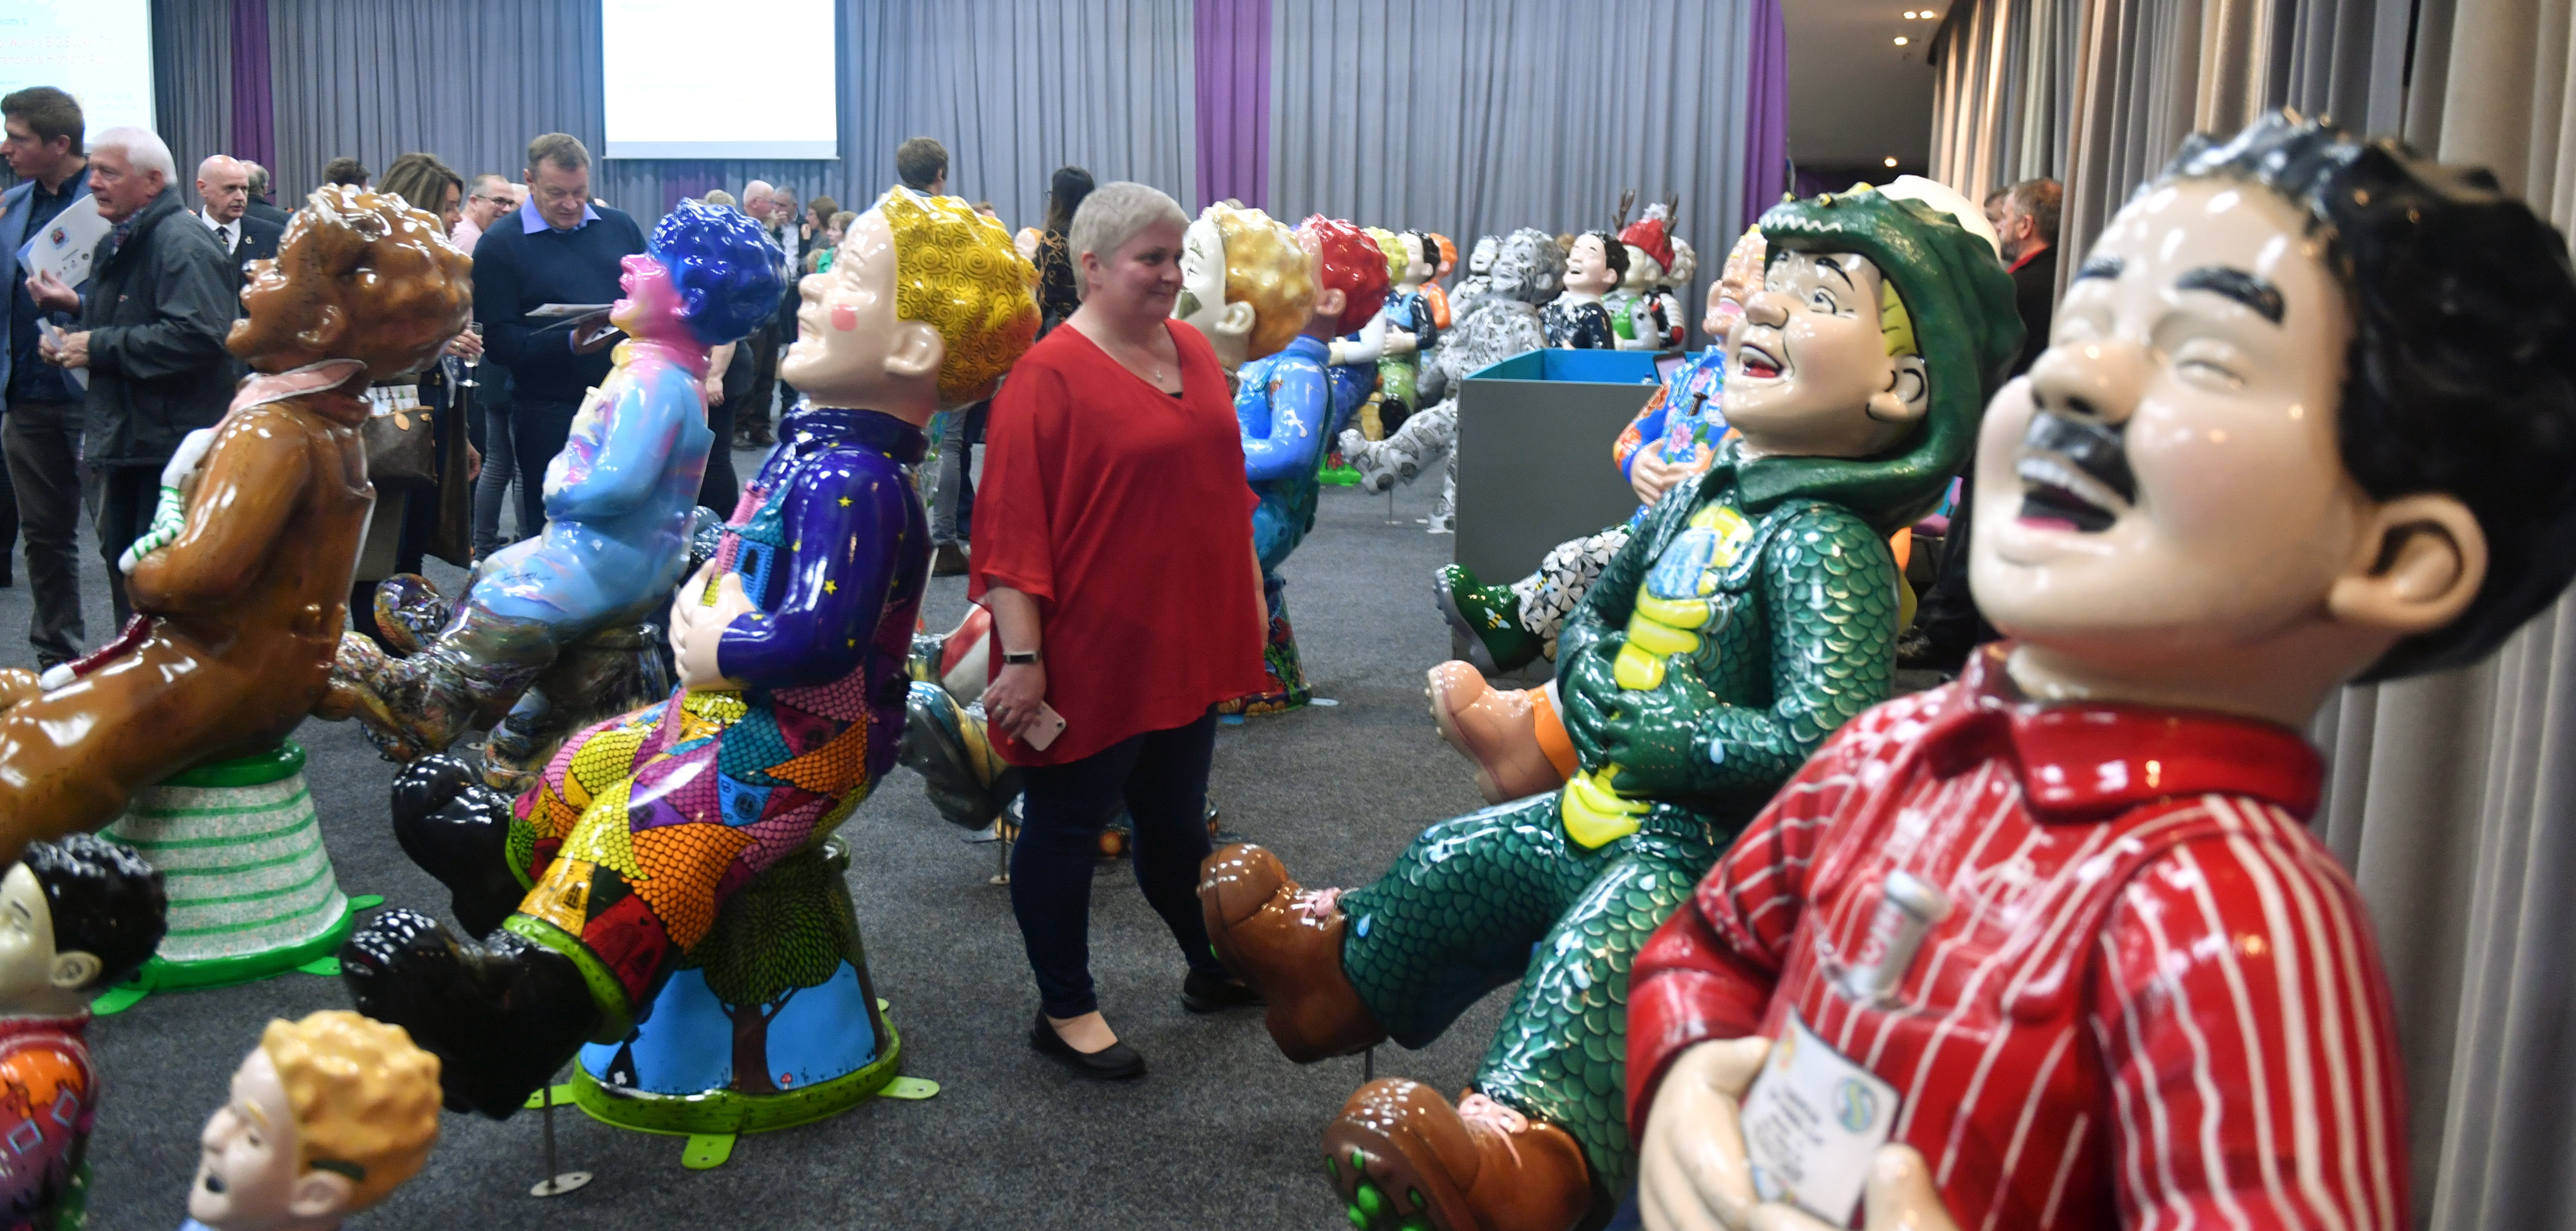 The Oor Wullie Auction in aid of the ARCHIE Foundation held at Thainstone Centre.
Pic by Chris Sumner